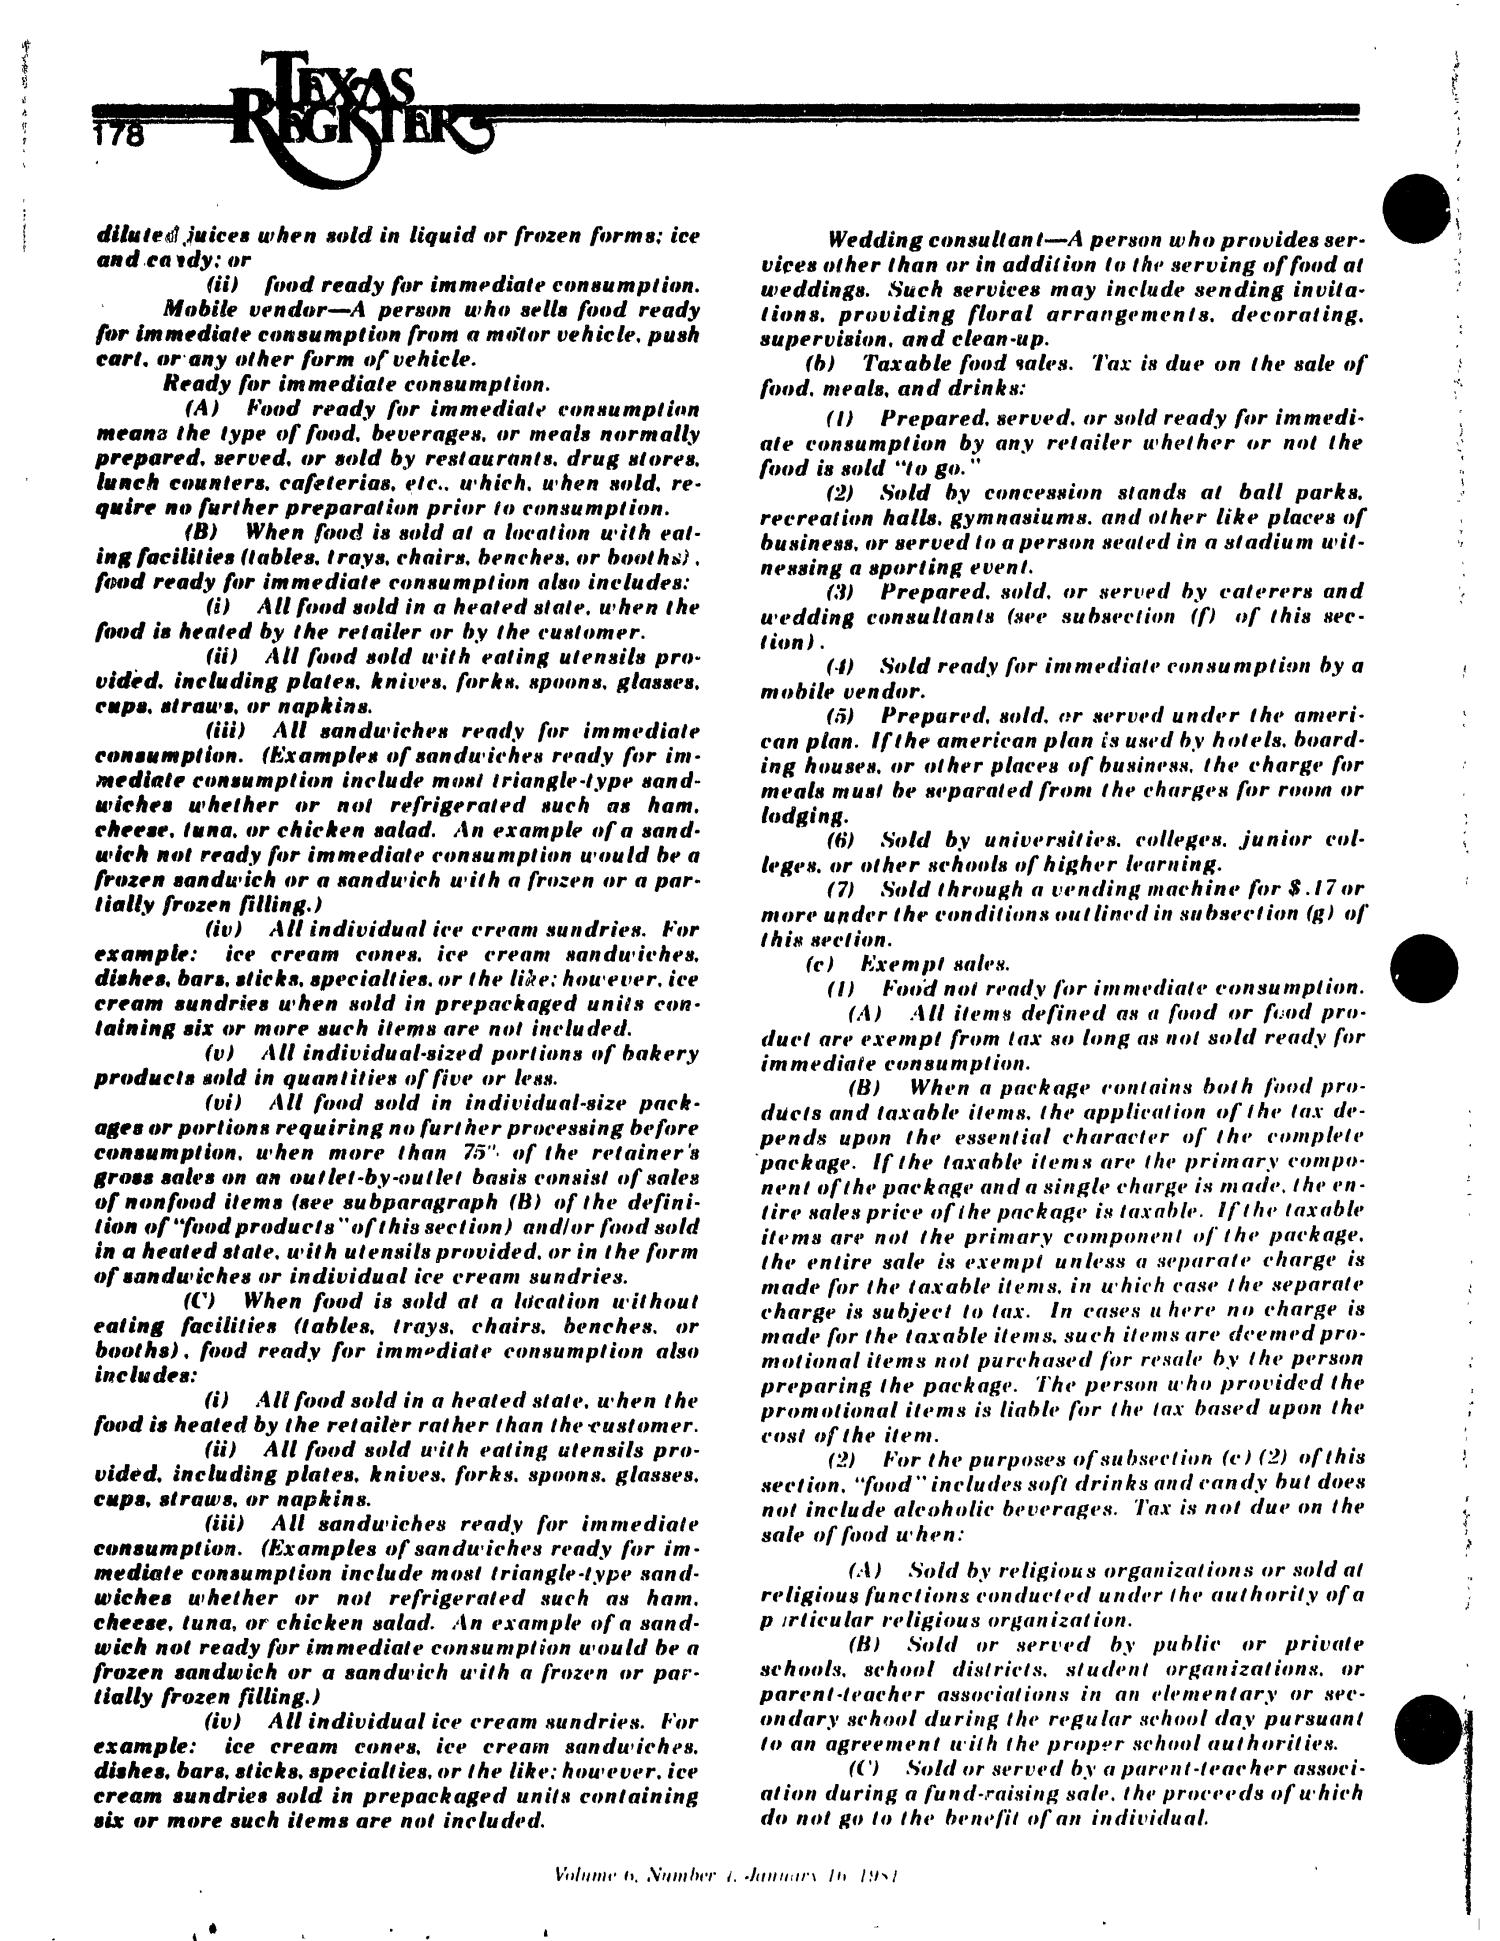 Texas Register, Volume 6, Number 4, Pages 168-226, January 16, 1981
                                                
                                                    178
                                                